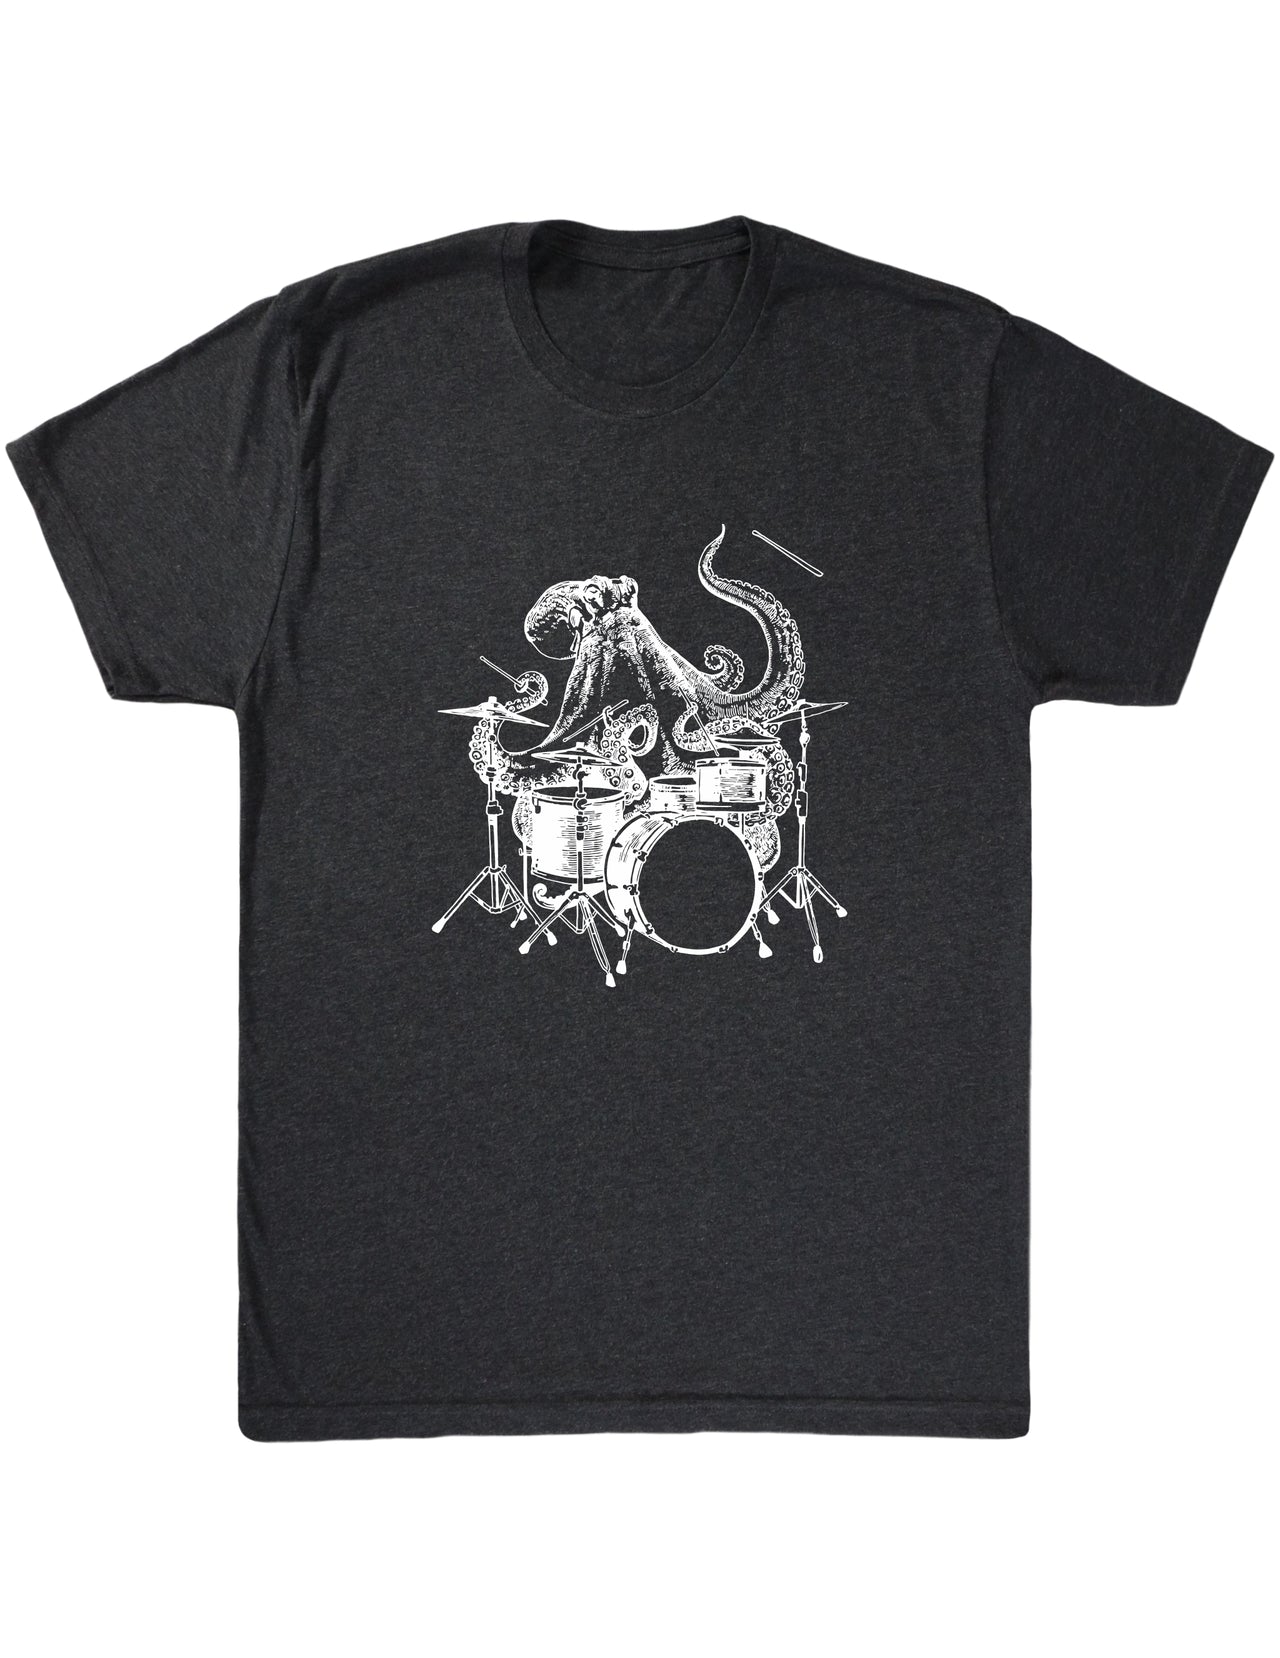 SEEMBO Octopus Playing Drums Men's Tri-Blend T-Shirt